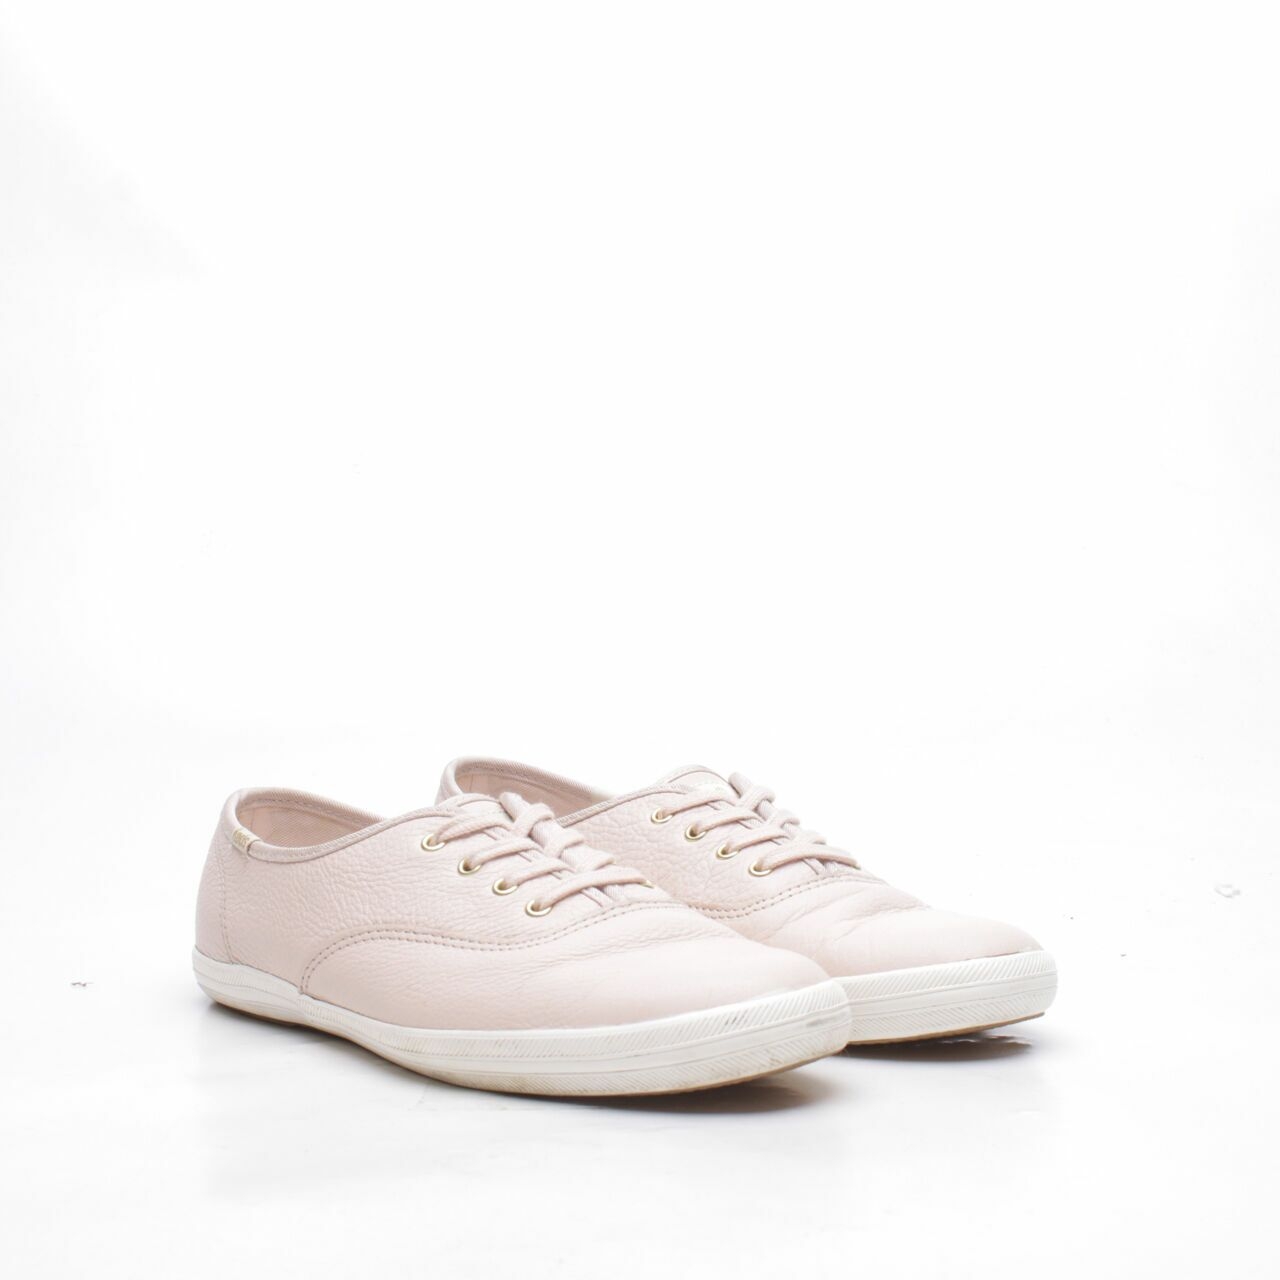 Keds For Kate Spade Leather Rose Sneakers